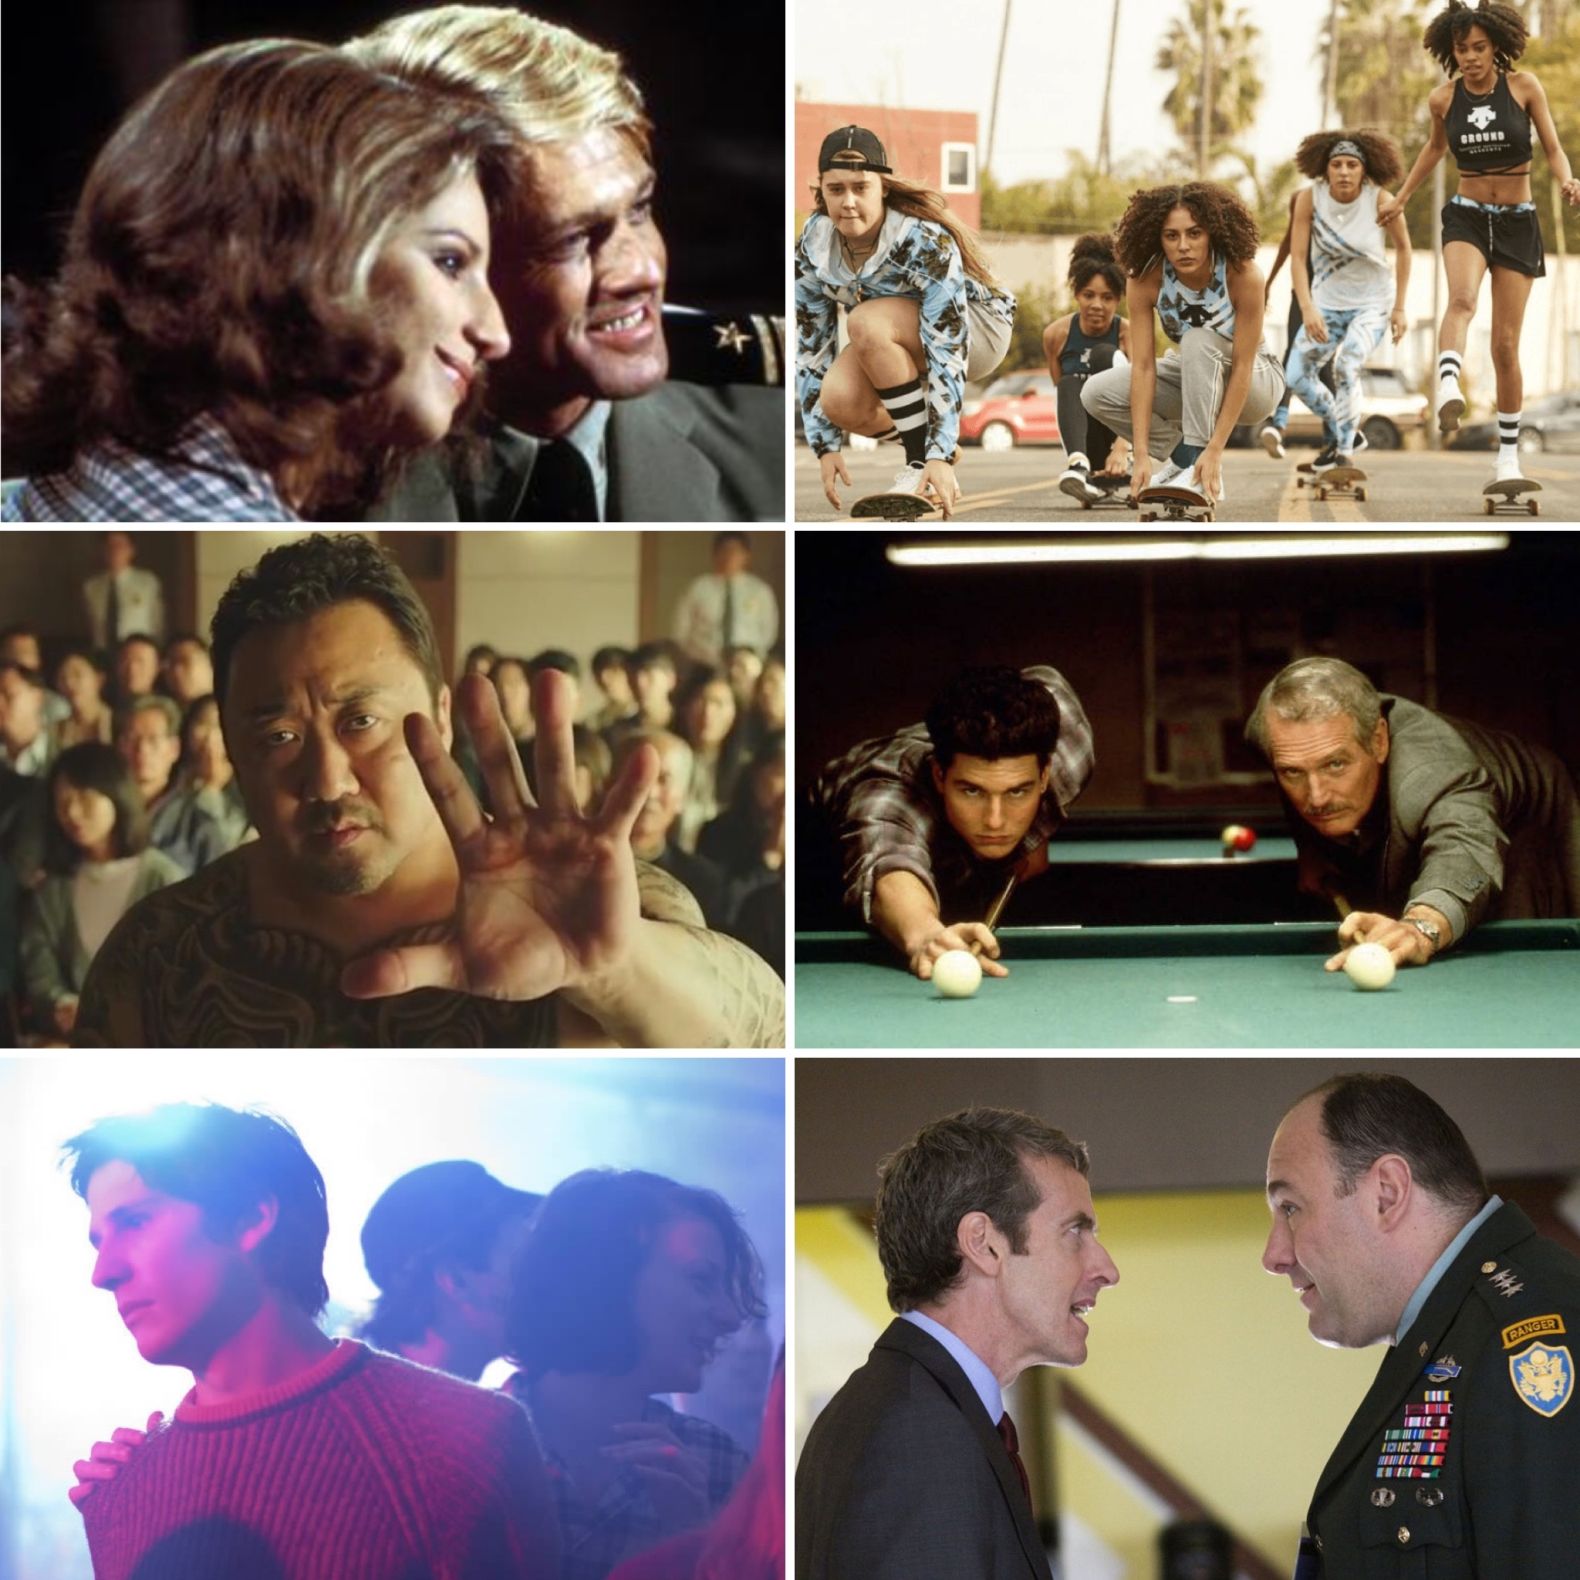 Duke Box #51: Our Guide to the Best Films on TV